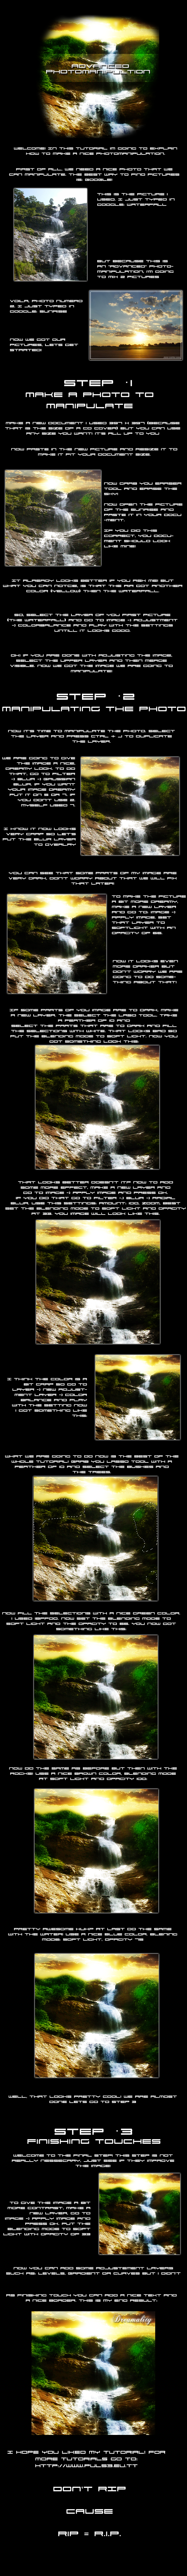 Photo_Manipulation_Tutorial_by_puls_3.png